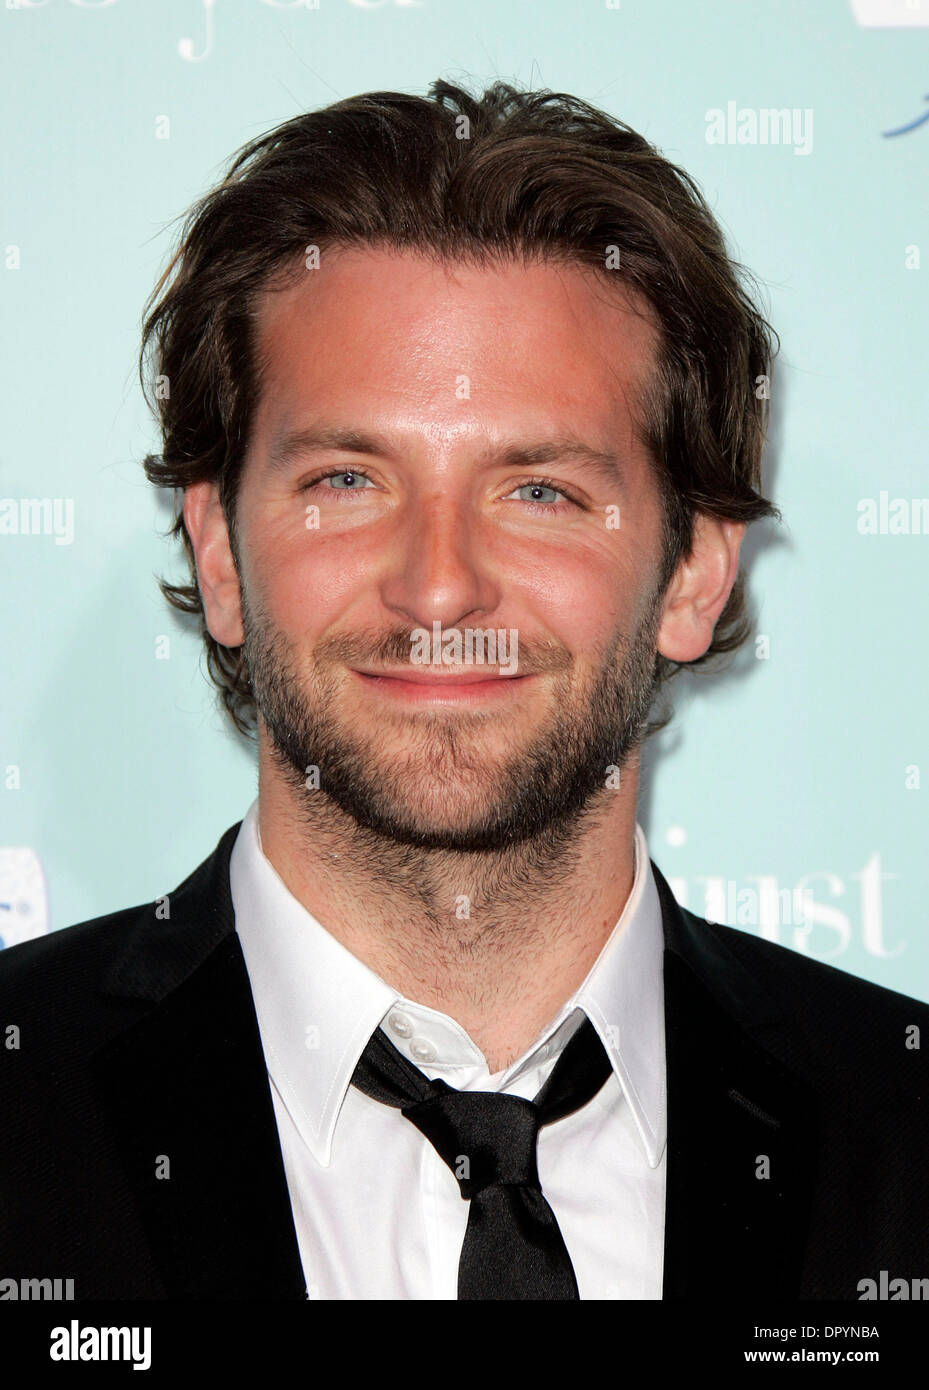 Feb 2, 2009 - Hollywood, California, USA - Actor BRADLEY COOPER arriving to the 'He's Just Not That Into You' World Premiere held at Grauman's Chinese Theatre. (Credit Image: © Lisa O'Connor/ZUMA Press) Stock Photo